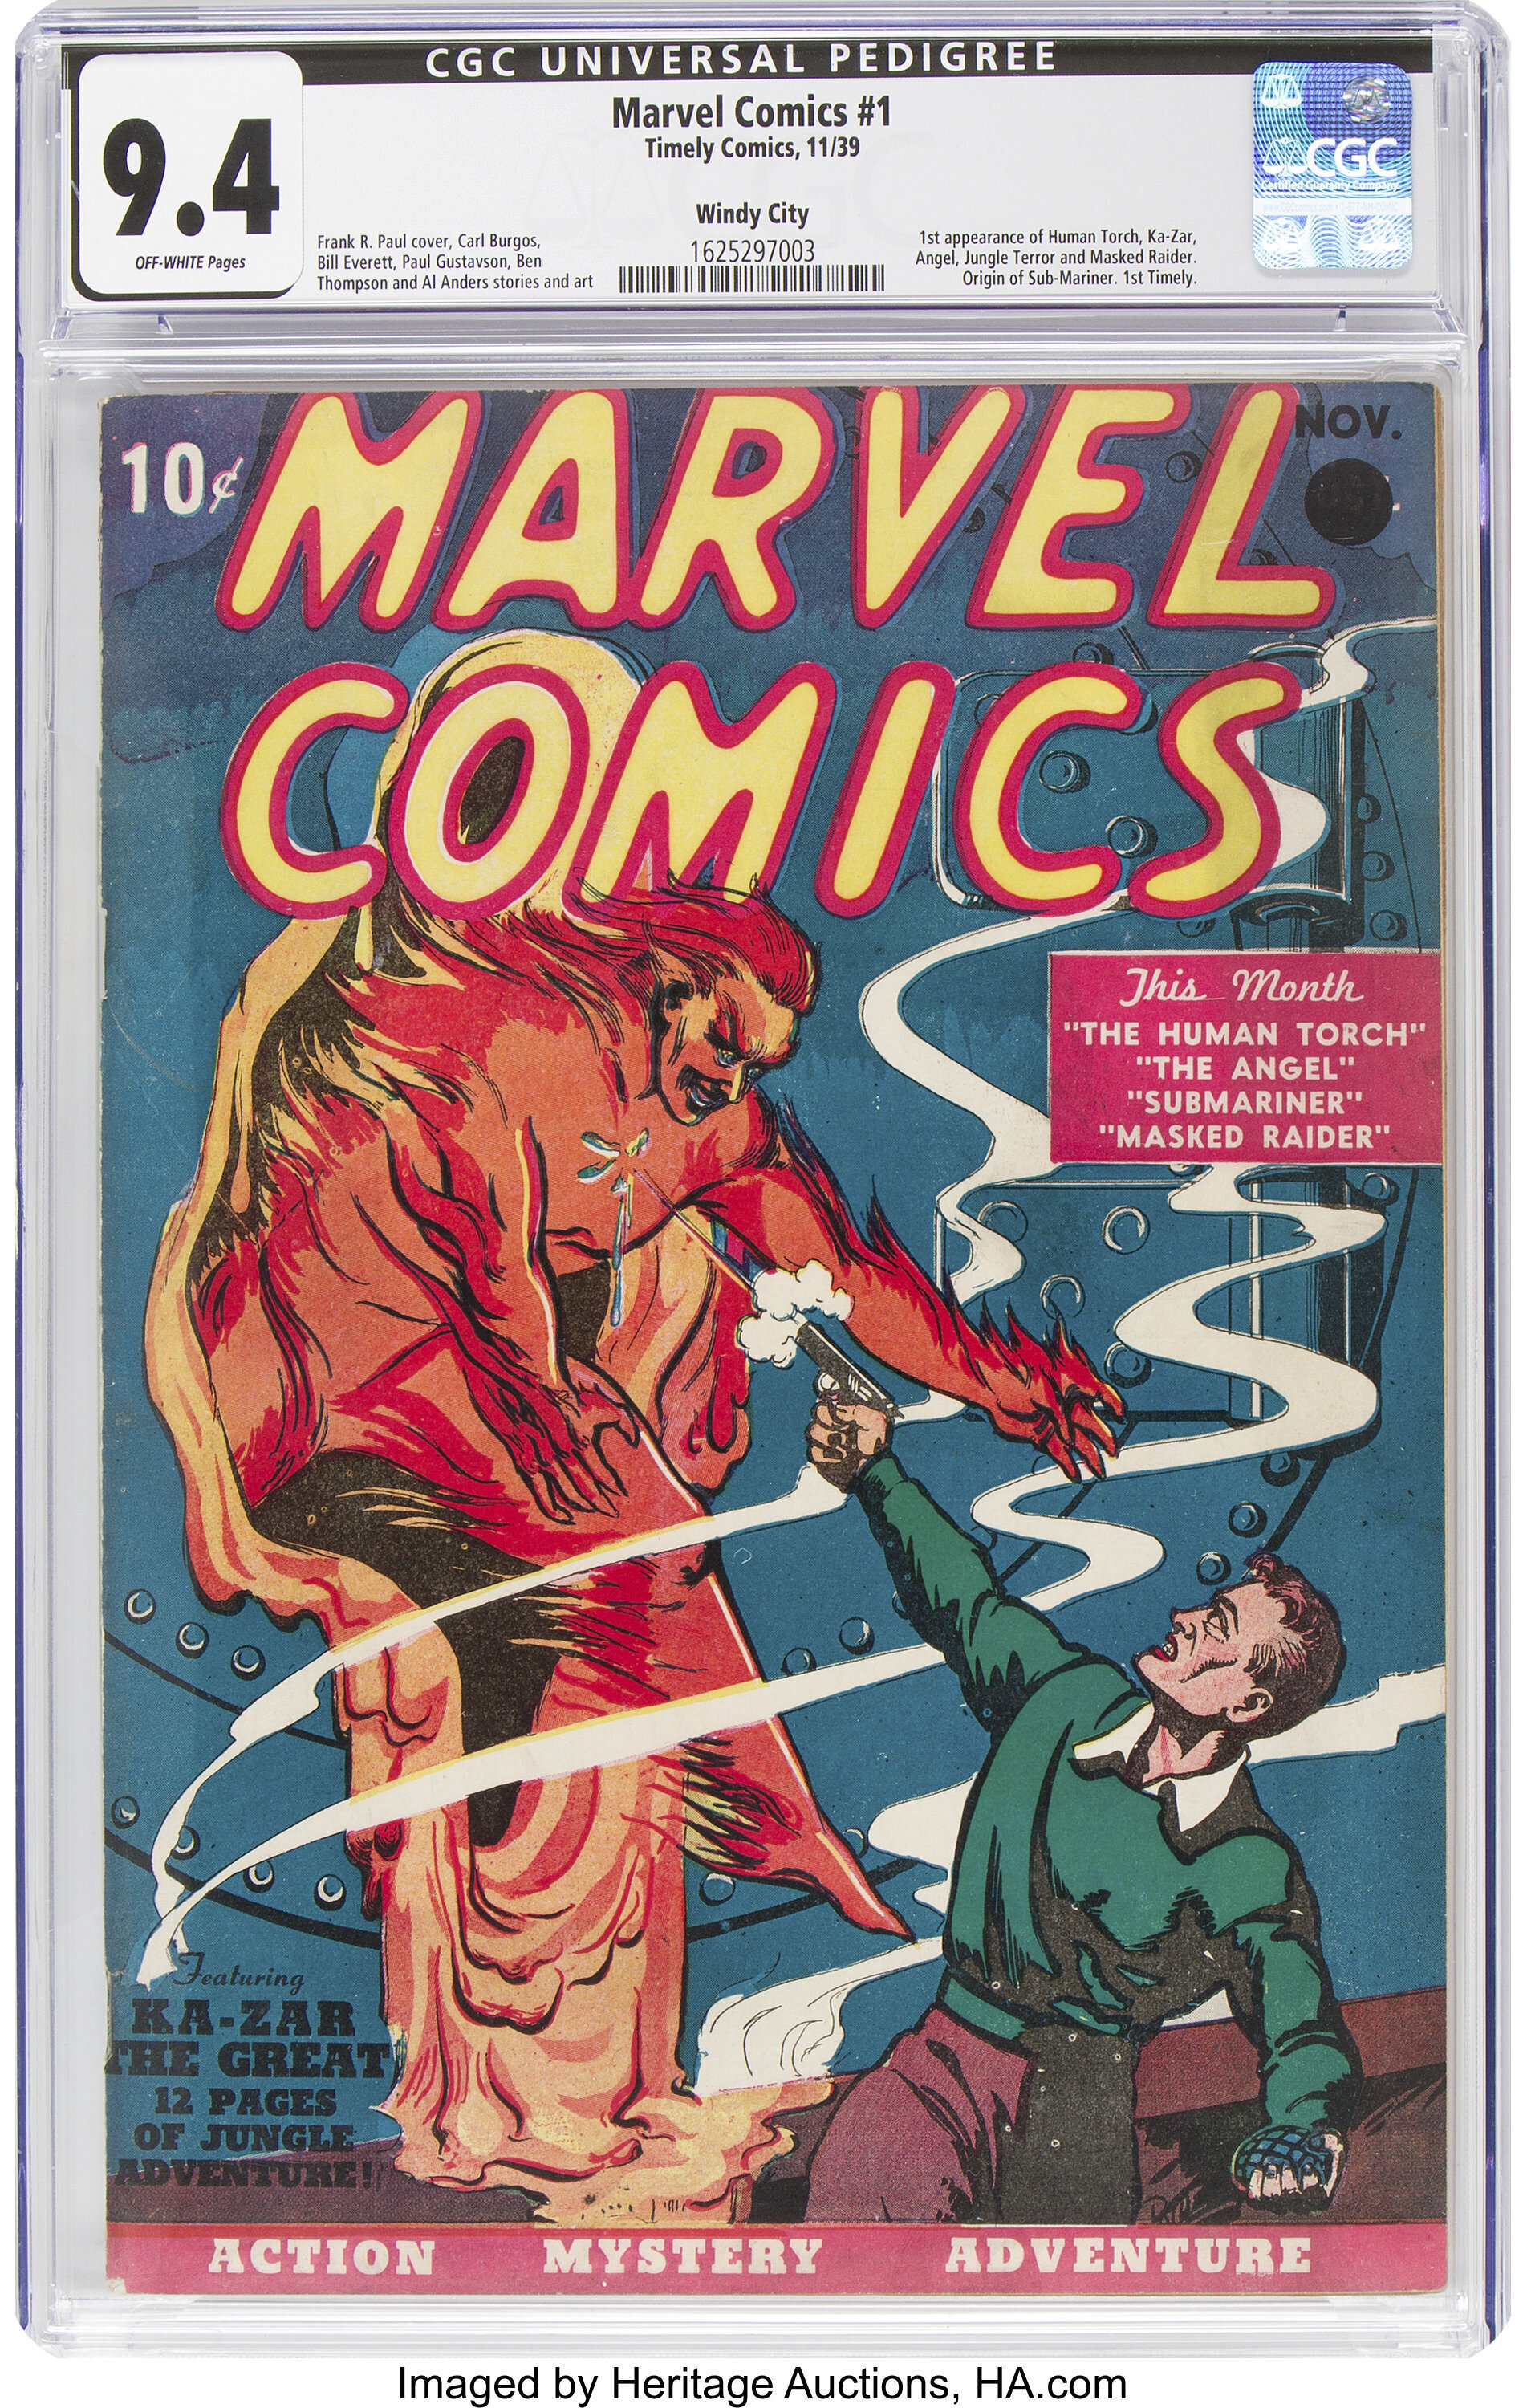 The first Marvel Comics comic book